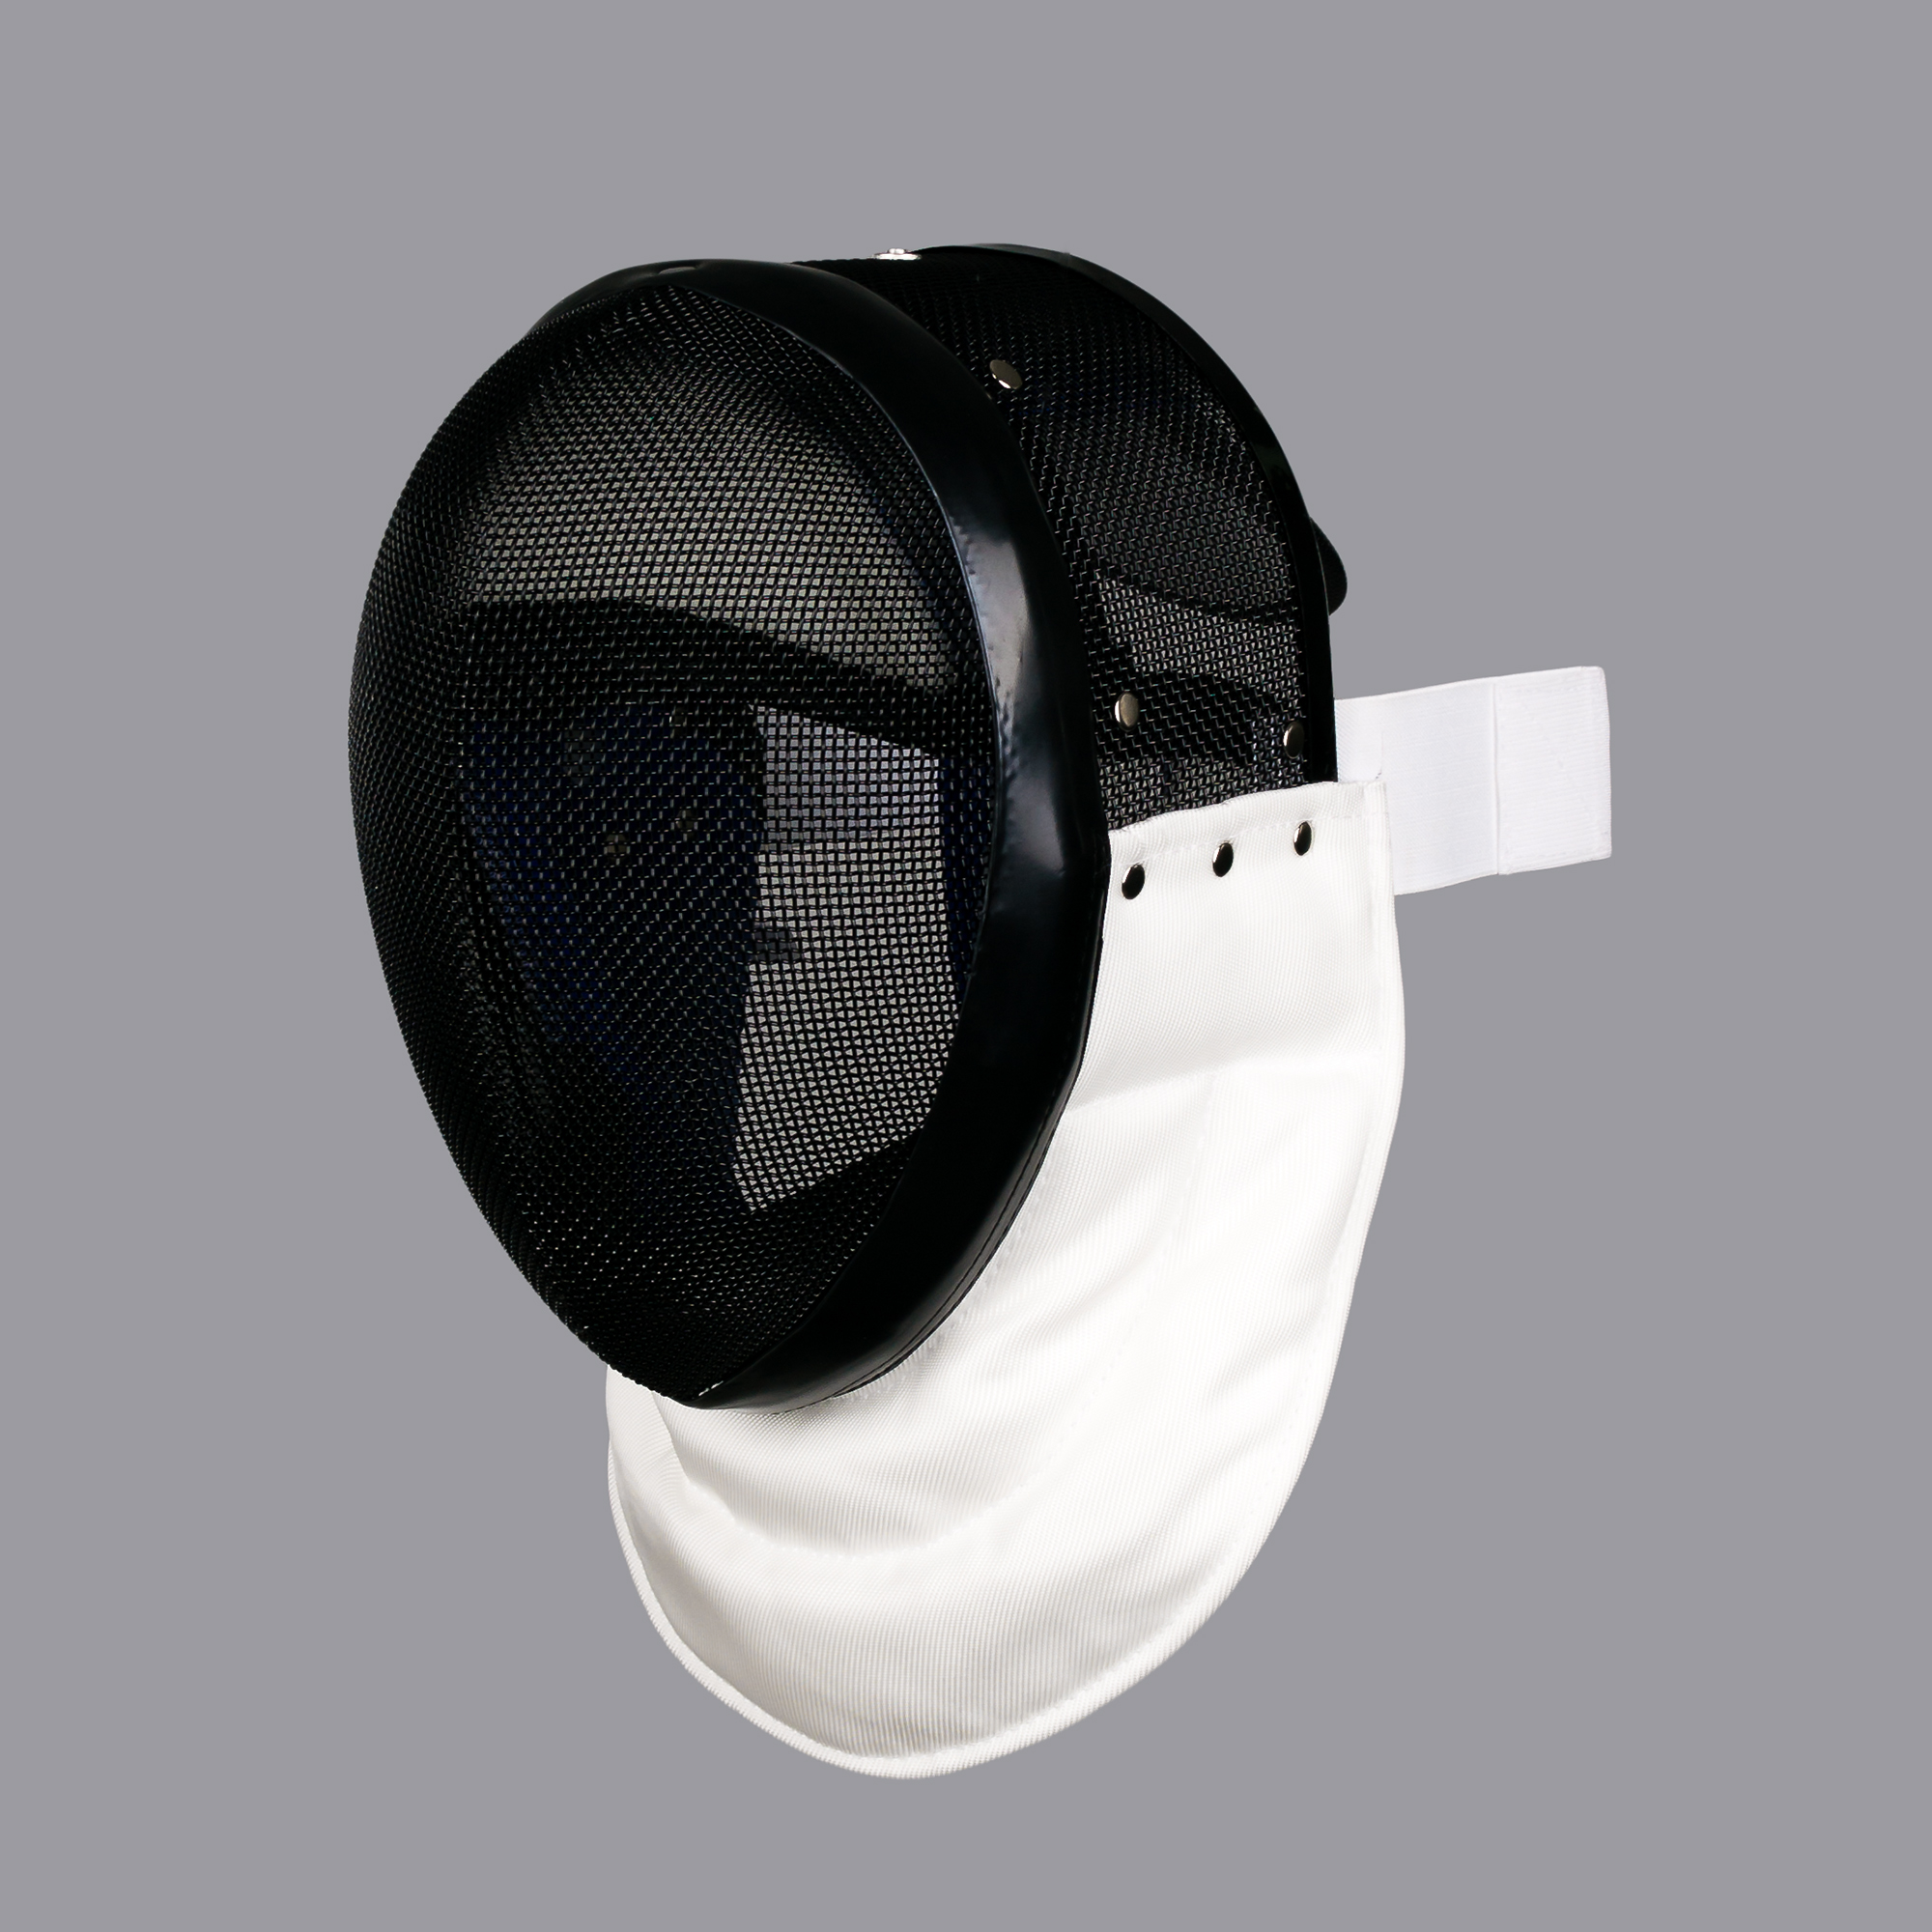 Epee mask StM Eco 350N, new fixture